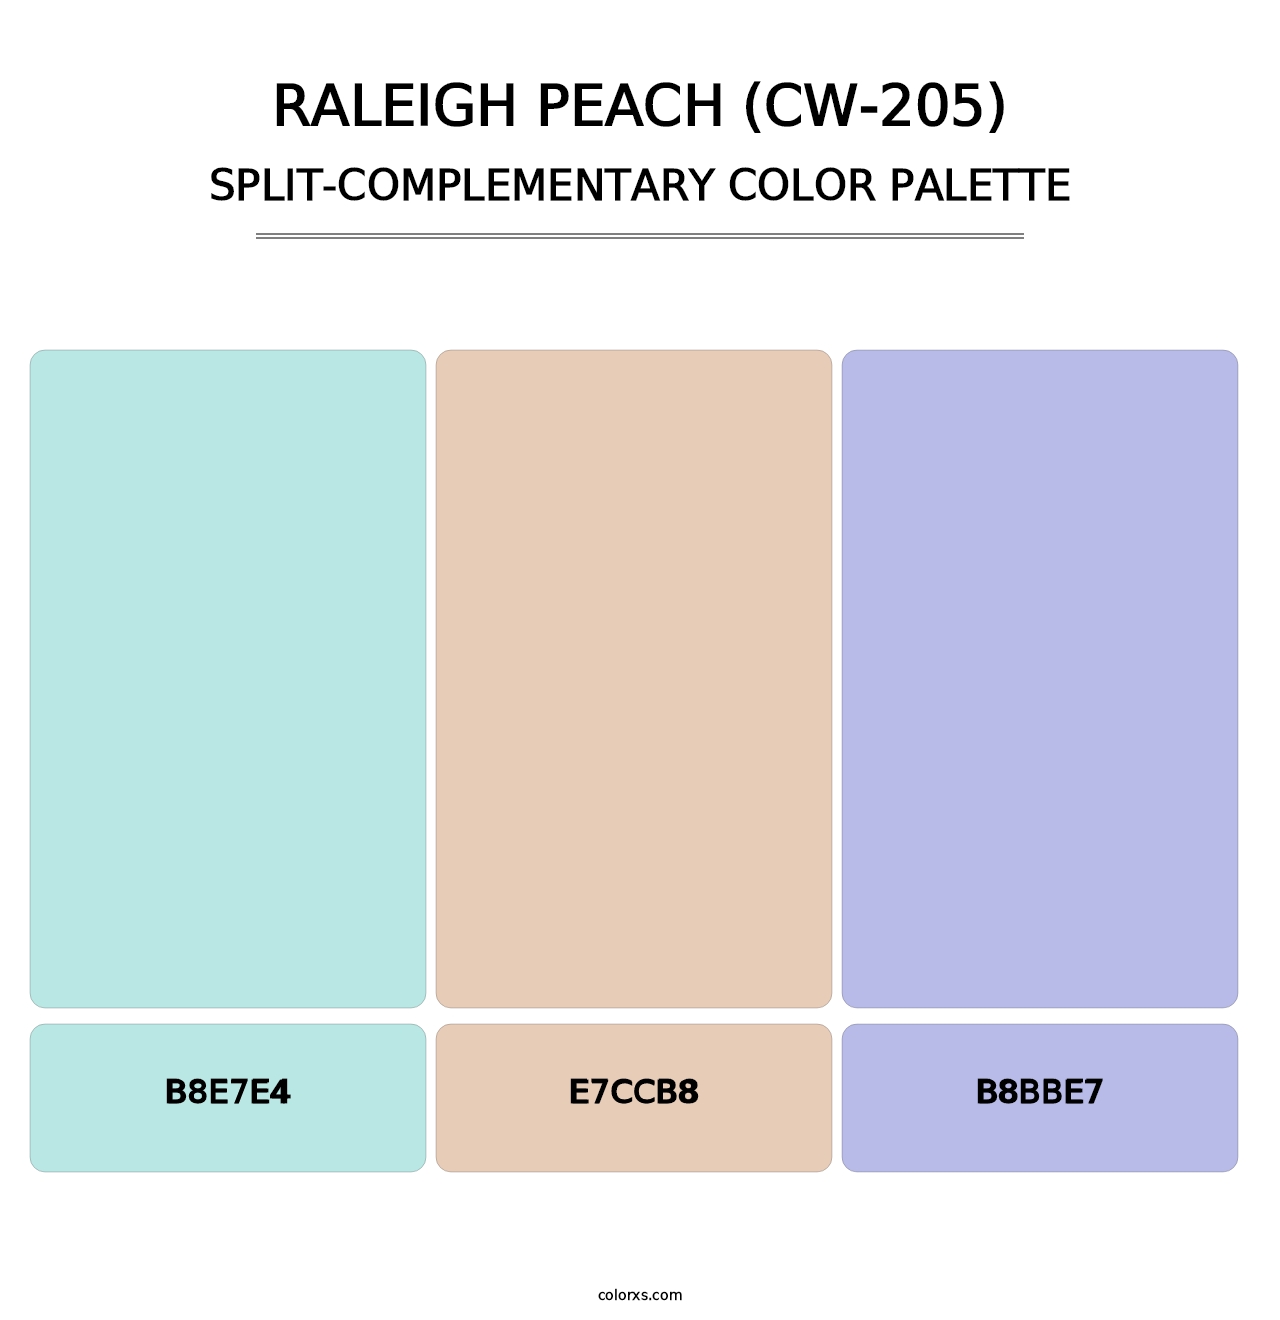 Raleigh Peach (CW-205) - Split-Complementary Color Palette